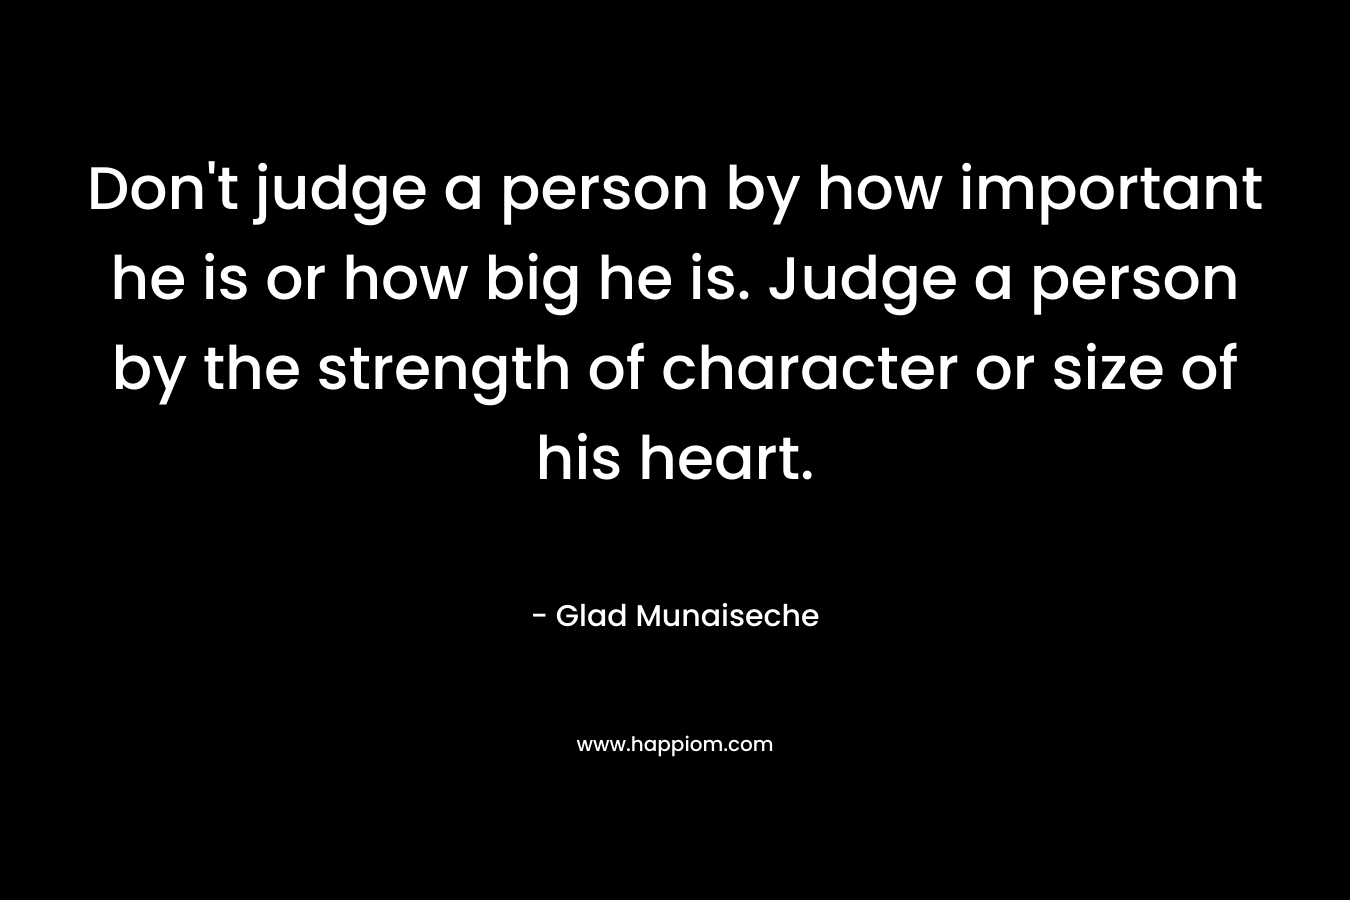 Don't judge a person by how important he is or how big he is. Judge a person by the strength of character or size of his heart.